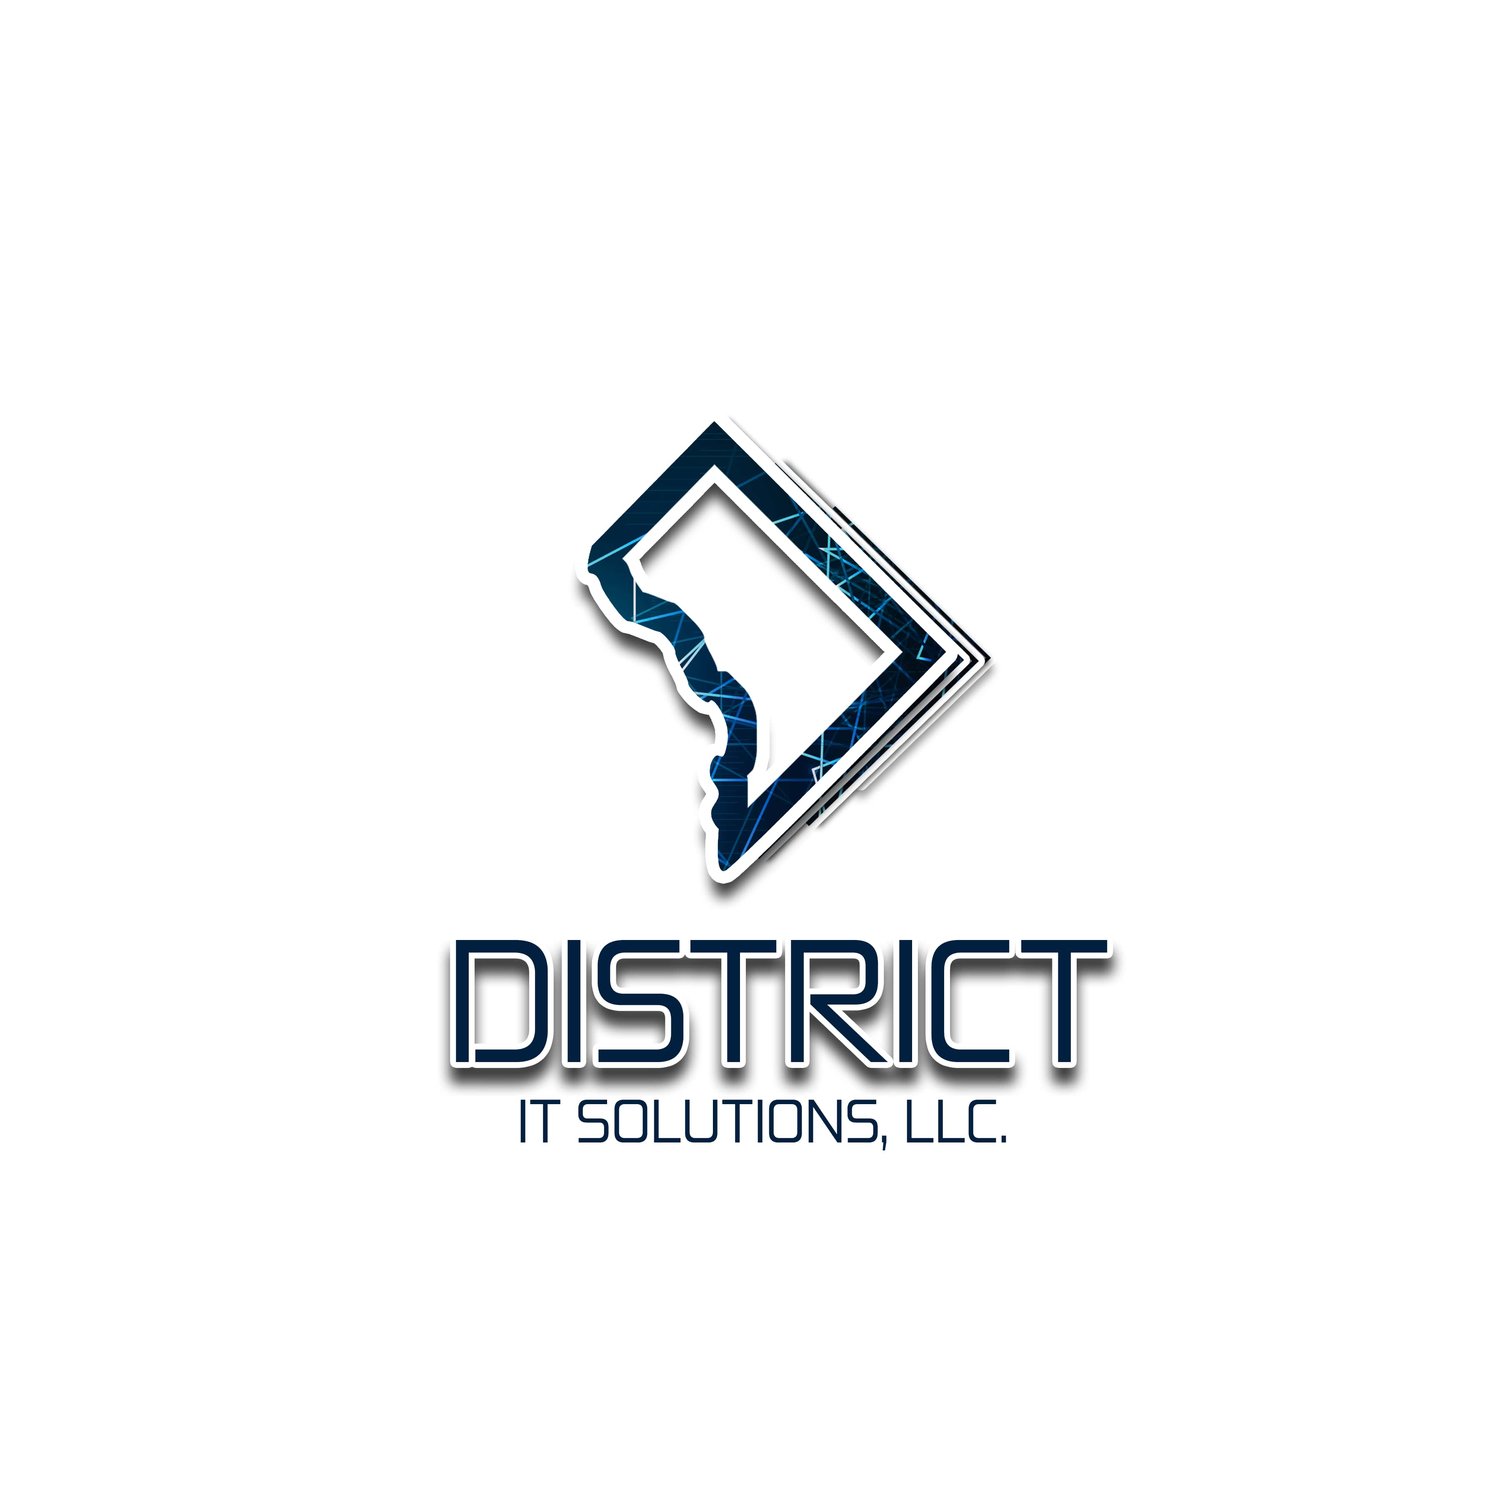 District IT Solutions